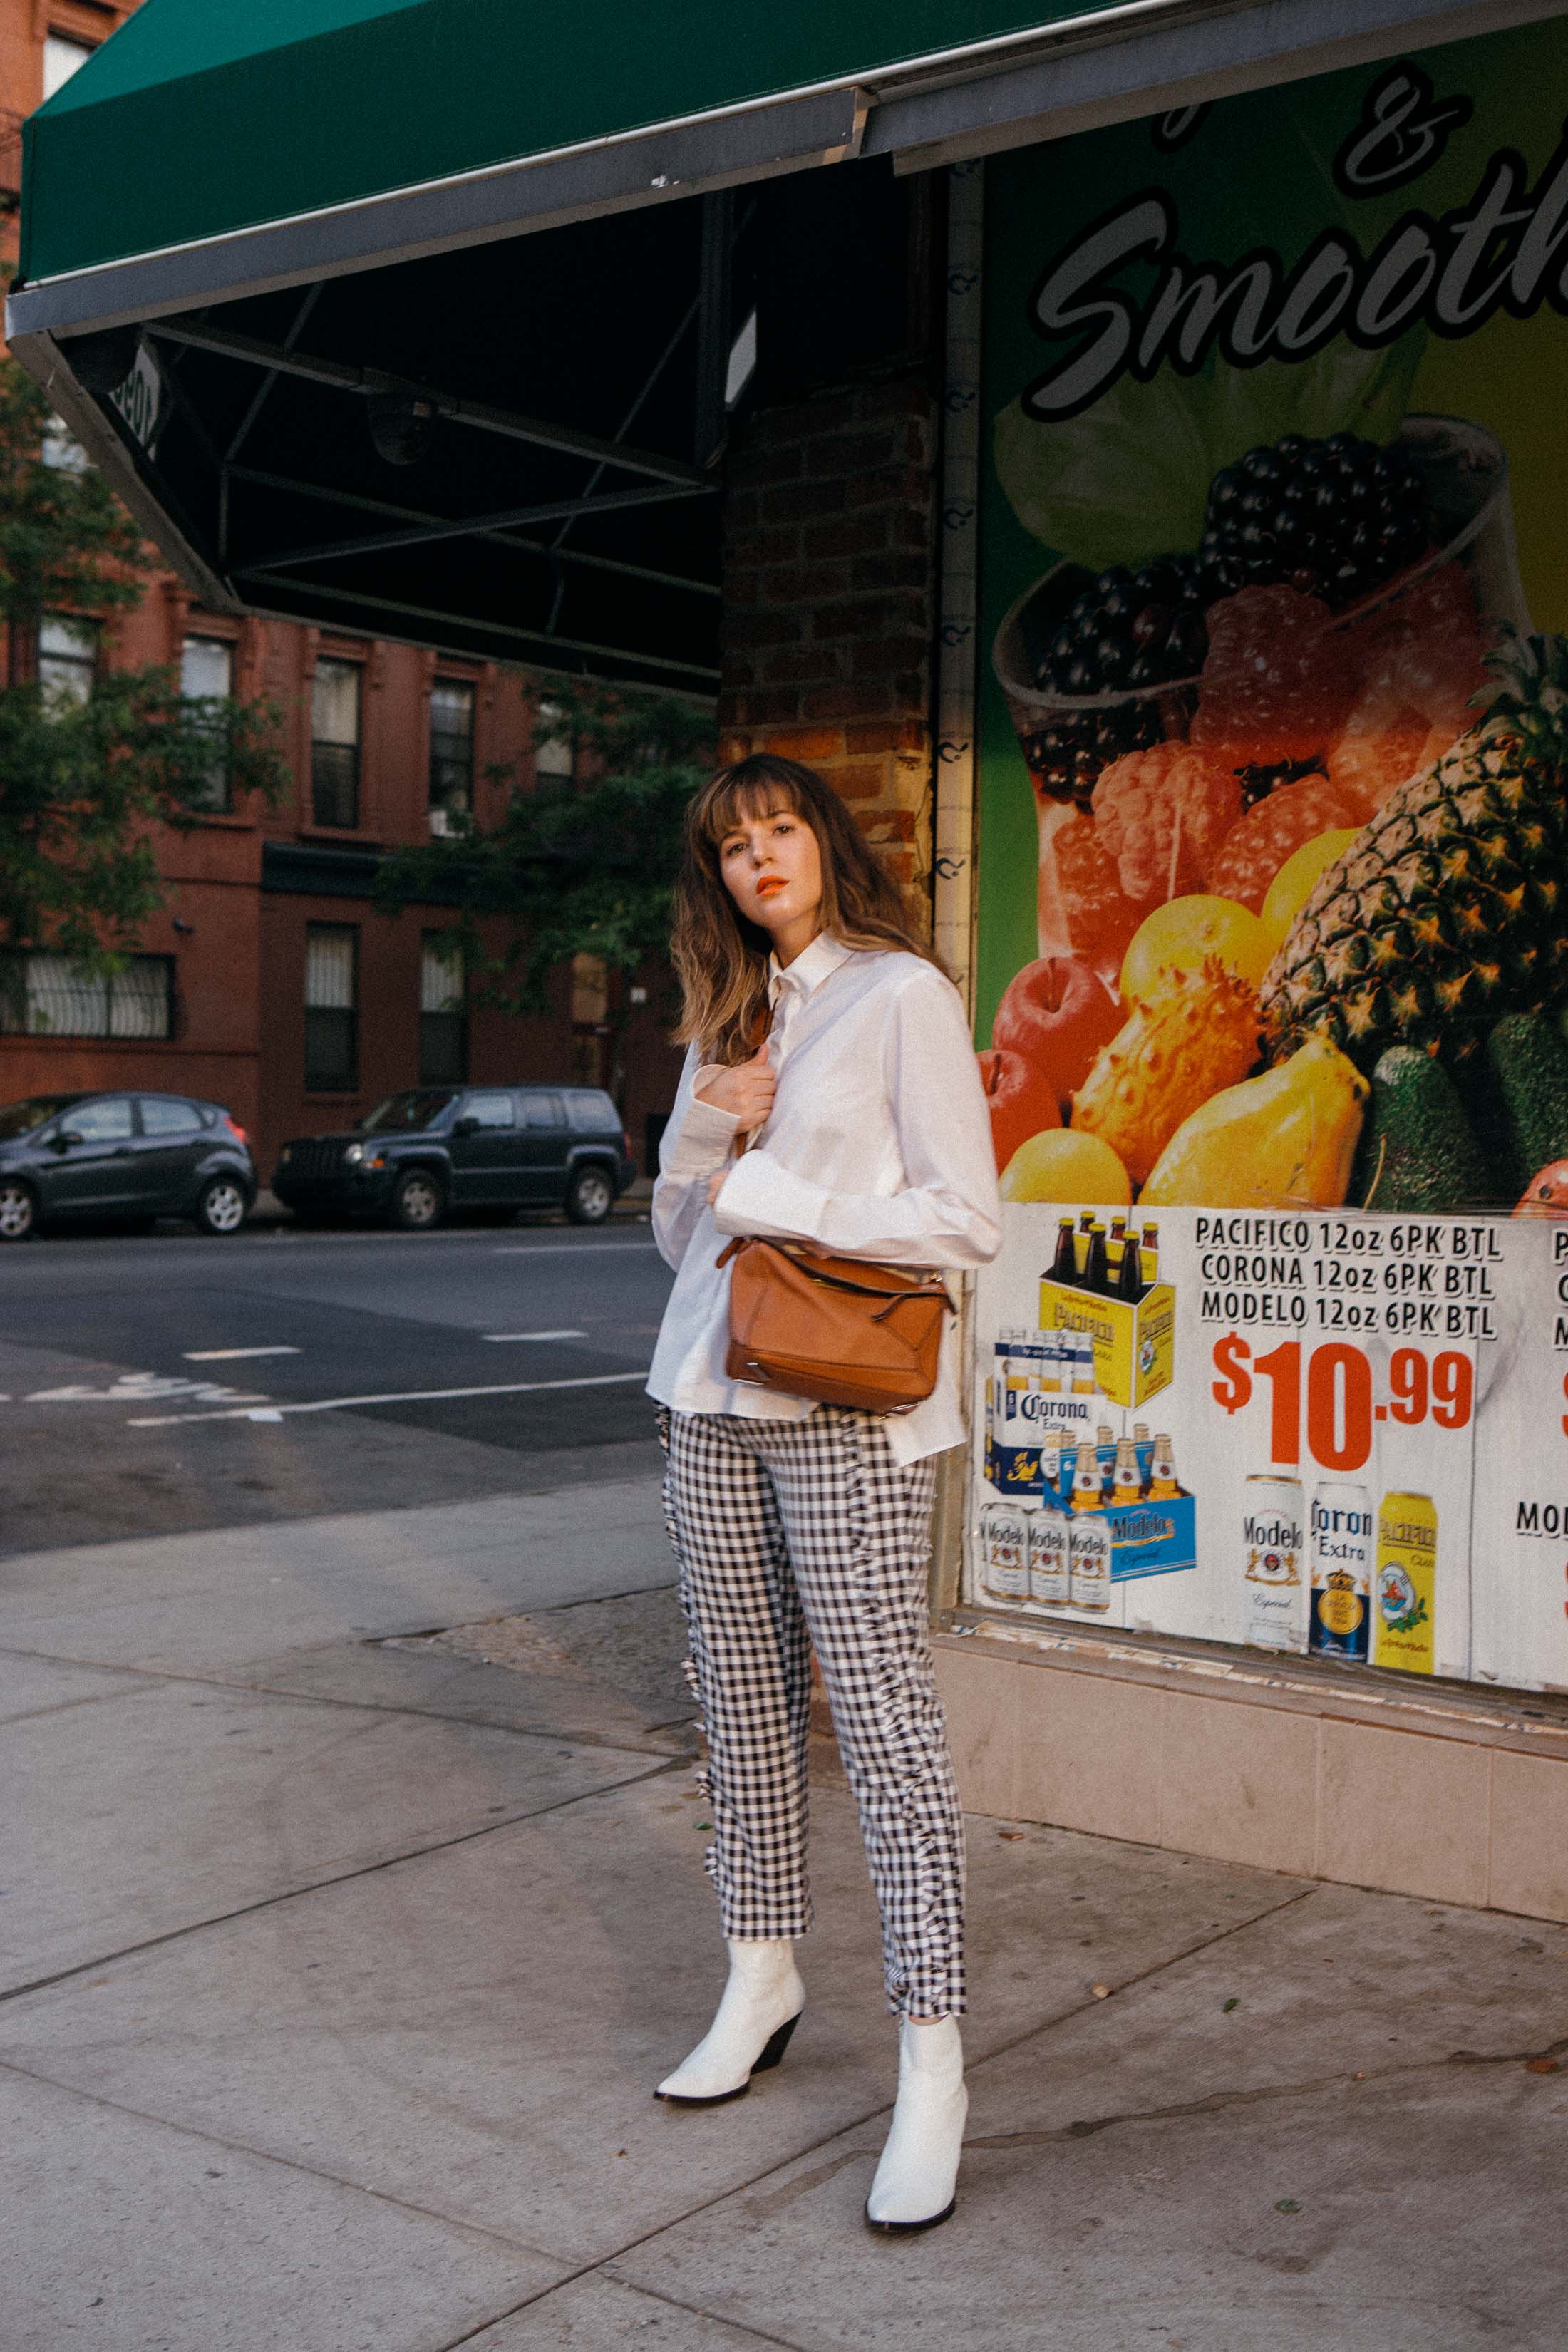 Maristella wears a white shirt, black gingham pants and white western style boots